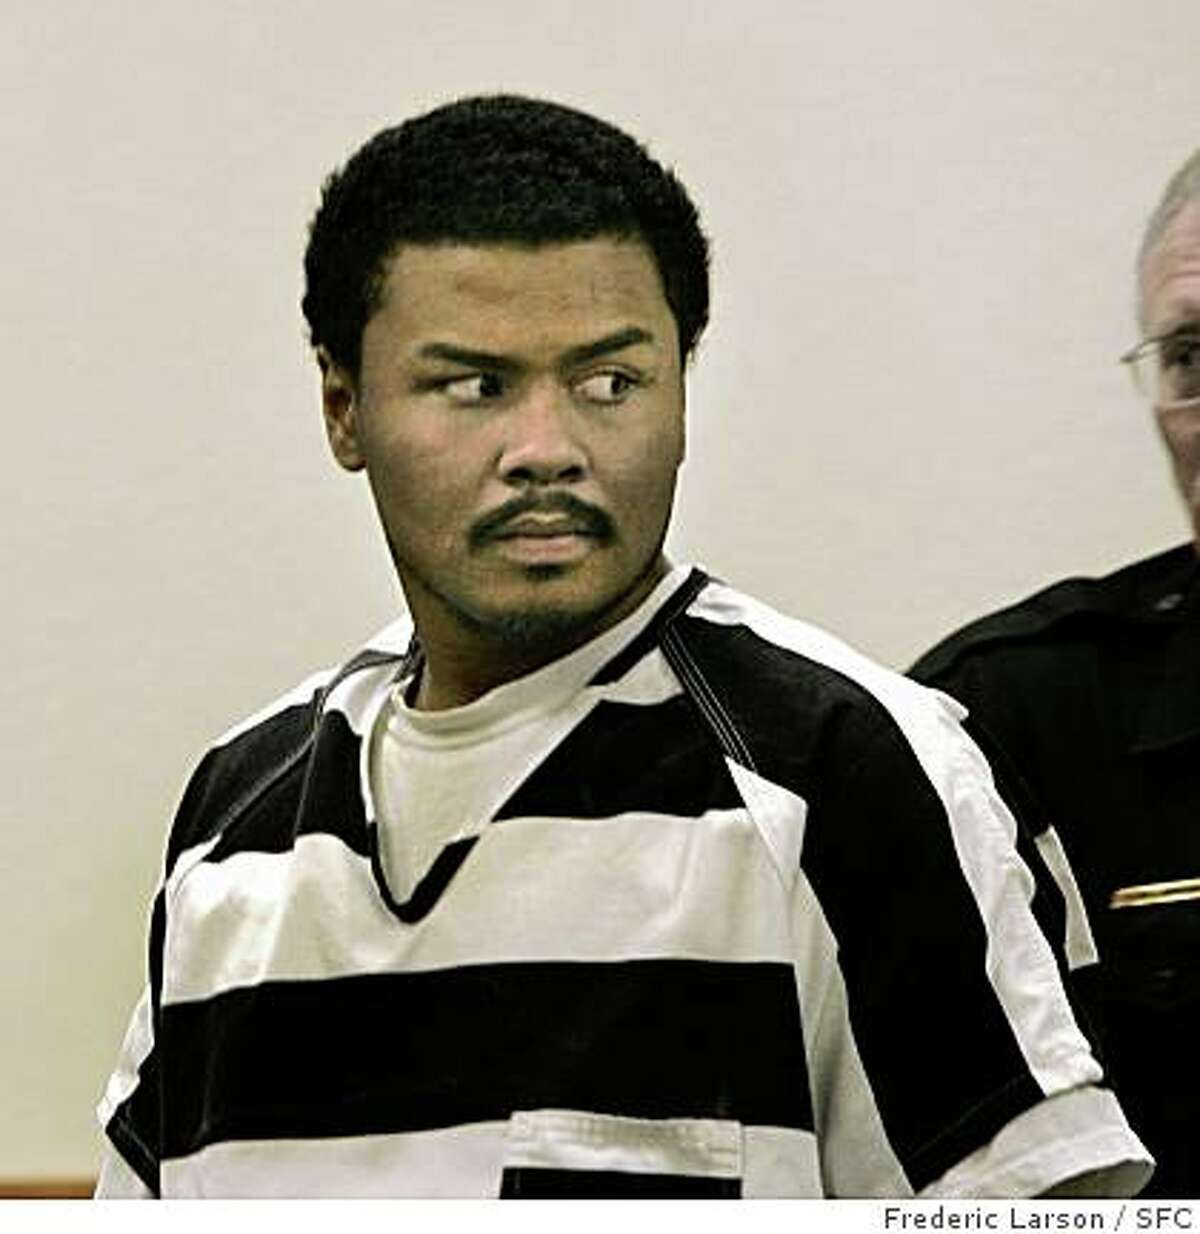 Renato Hughes Jr. is charge with two counts of murder in the deaths of Rashad Williams and Christian Foster and attends the preliminary heatng at Lake County, Clearlake. Rashad Williams was a national hero back in 1999 who ran in bay to breakers to ran money for a victim of the columbine massacre. his life unraveled at some point. on dec. 7, he was shot to death by Shannon Edmonds, whose home he'd allegedly broken into with 2 friends to steal dope. edmonds has not been charged -- instead, Renato Hughes jr., Rashad's best friend, is being charged with his murder. 1/18/06